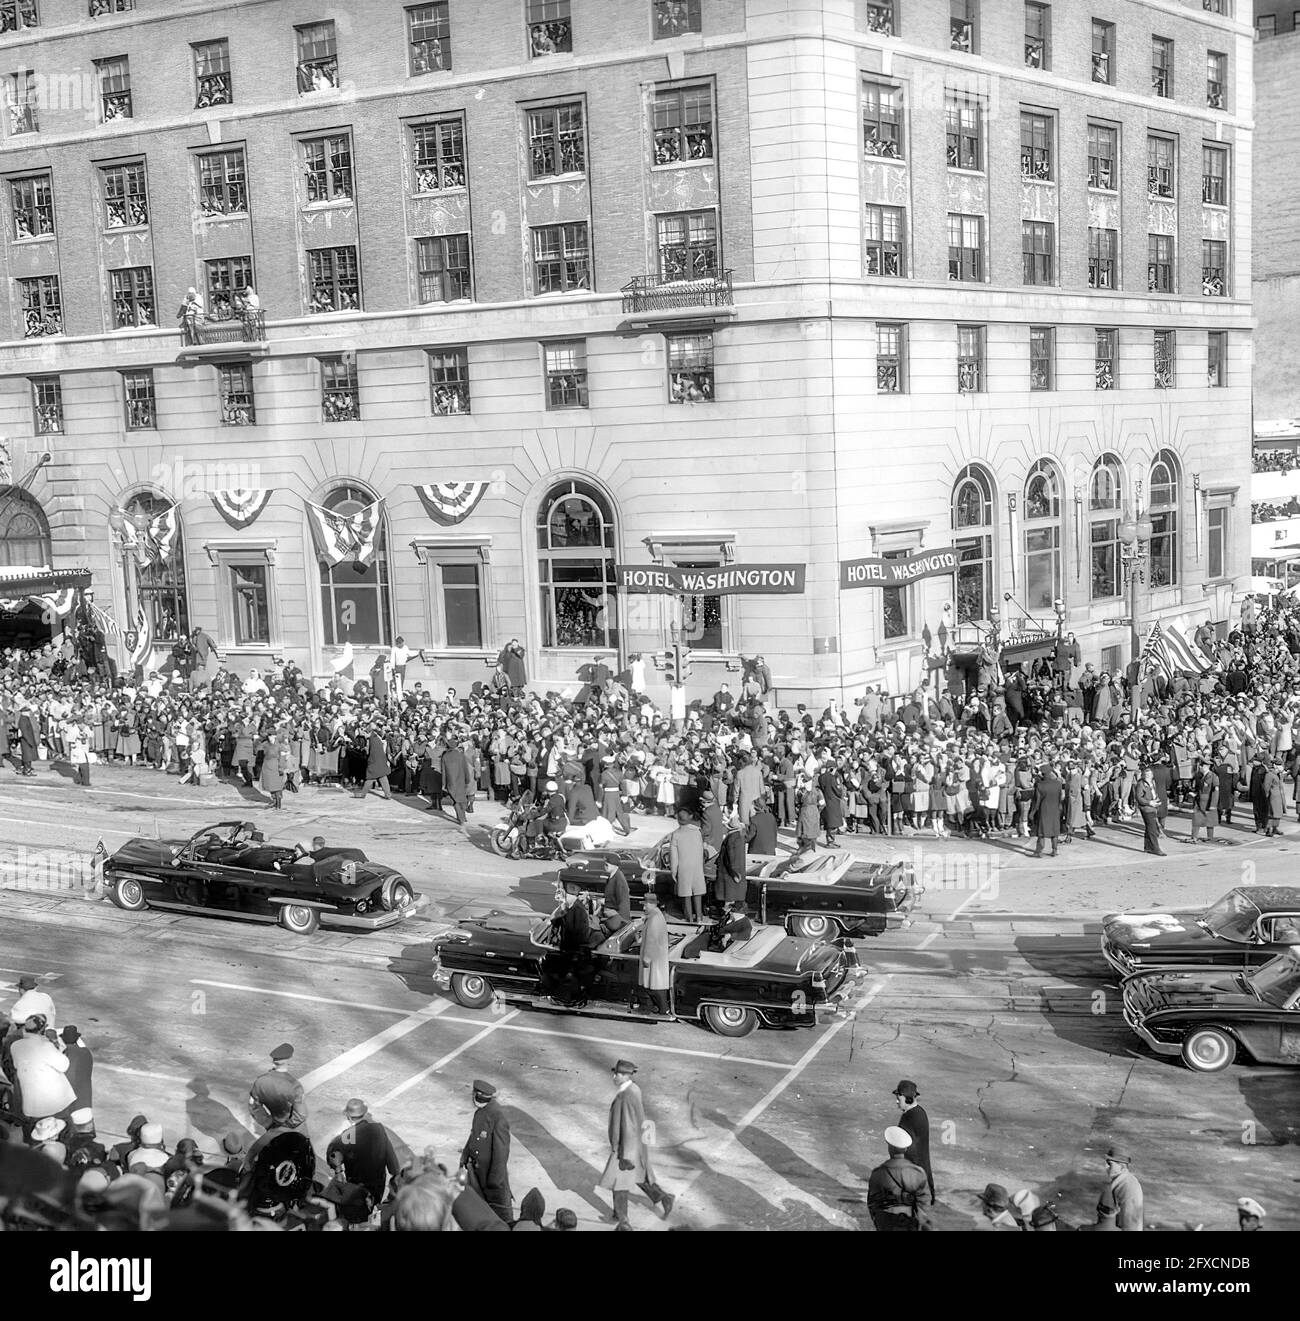 Inaugural Parade for President John F. Kennedy along Pennsylvania Avenue, Washington, D.C. The Presidential motorcade turns onto NW 15th Street from Pennsylvania Avenue in front of Hotel Washington. President Kennedy and First Lady Jacqueline Kennedy in lead car. Stock Photo